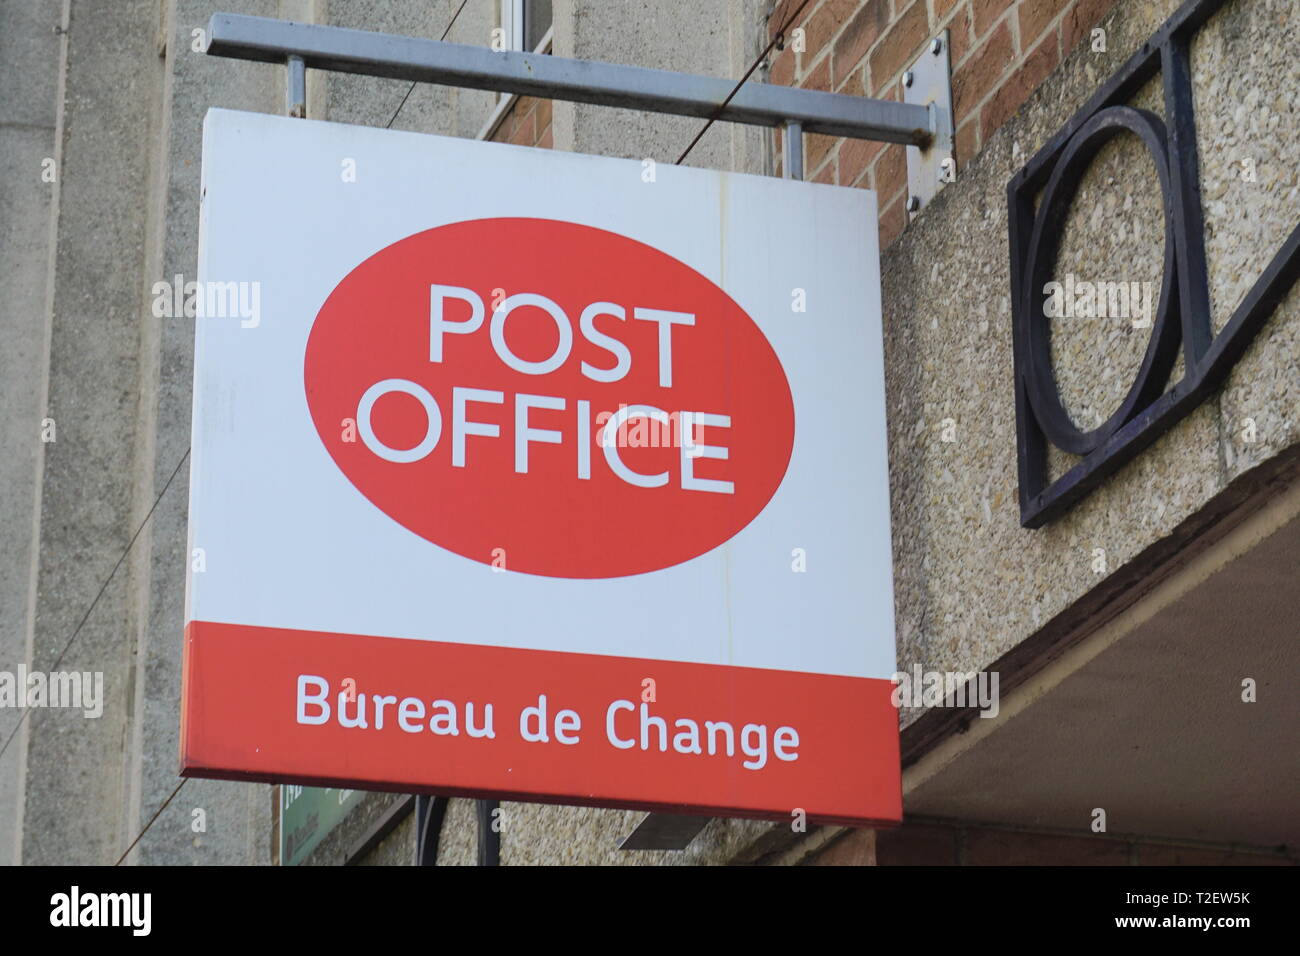 Post office sign in Reading, UK Stock Photo